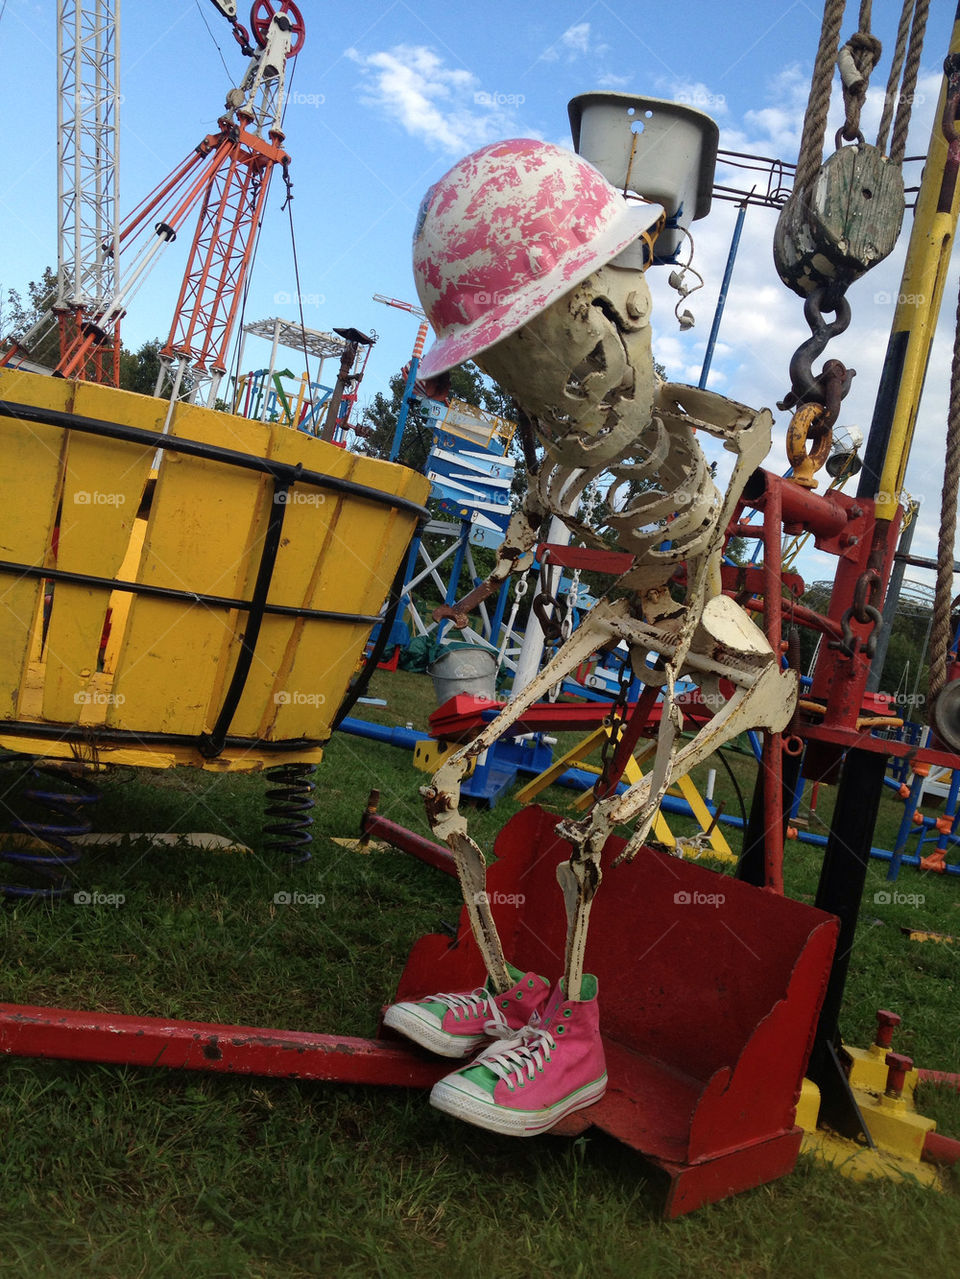 More of the one and only life size mousetrap at Maker Faire in Queens,